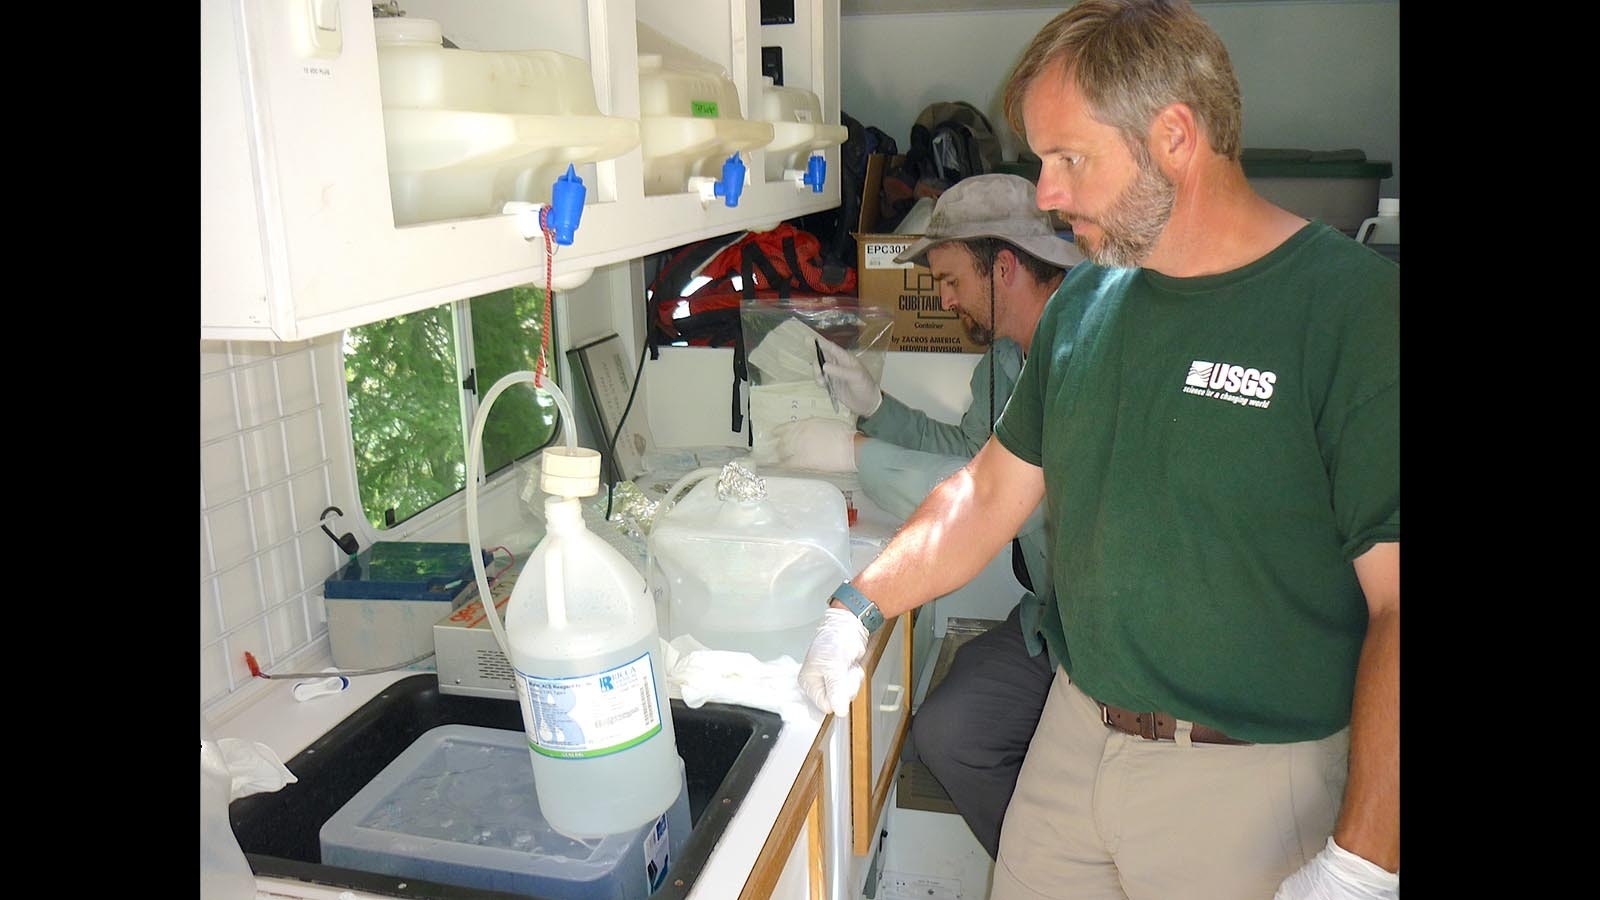 Elliott Barnhart, foreground, in the lab truck to processing hot springs water samples.